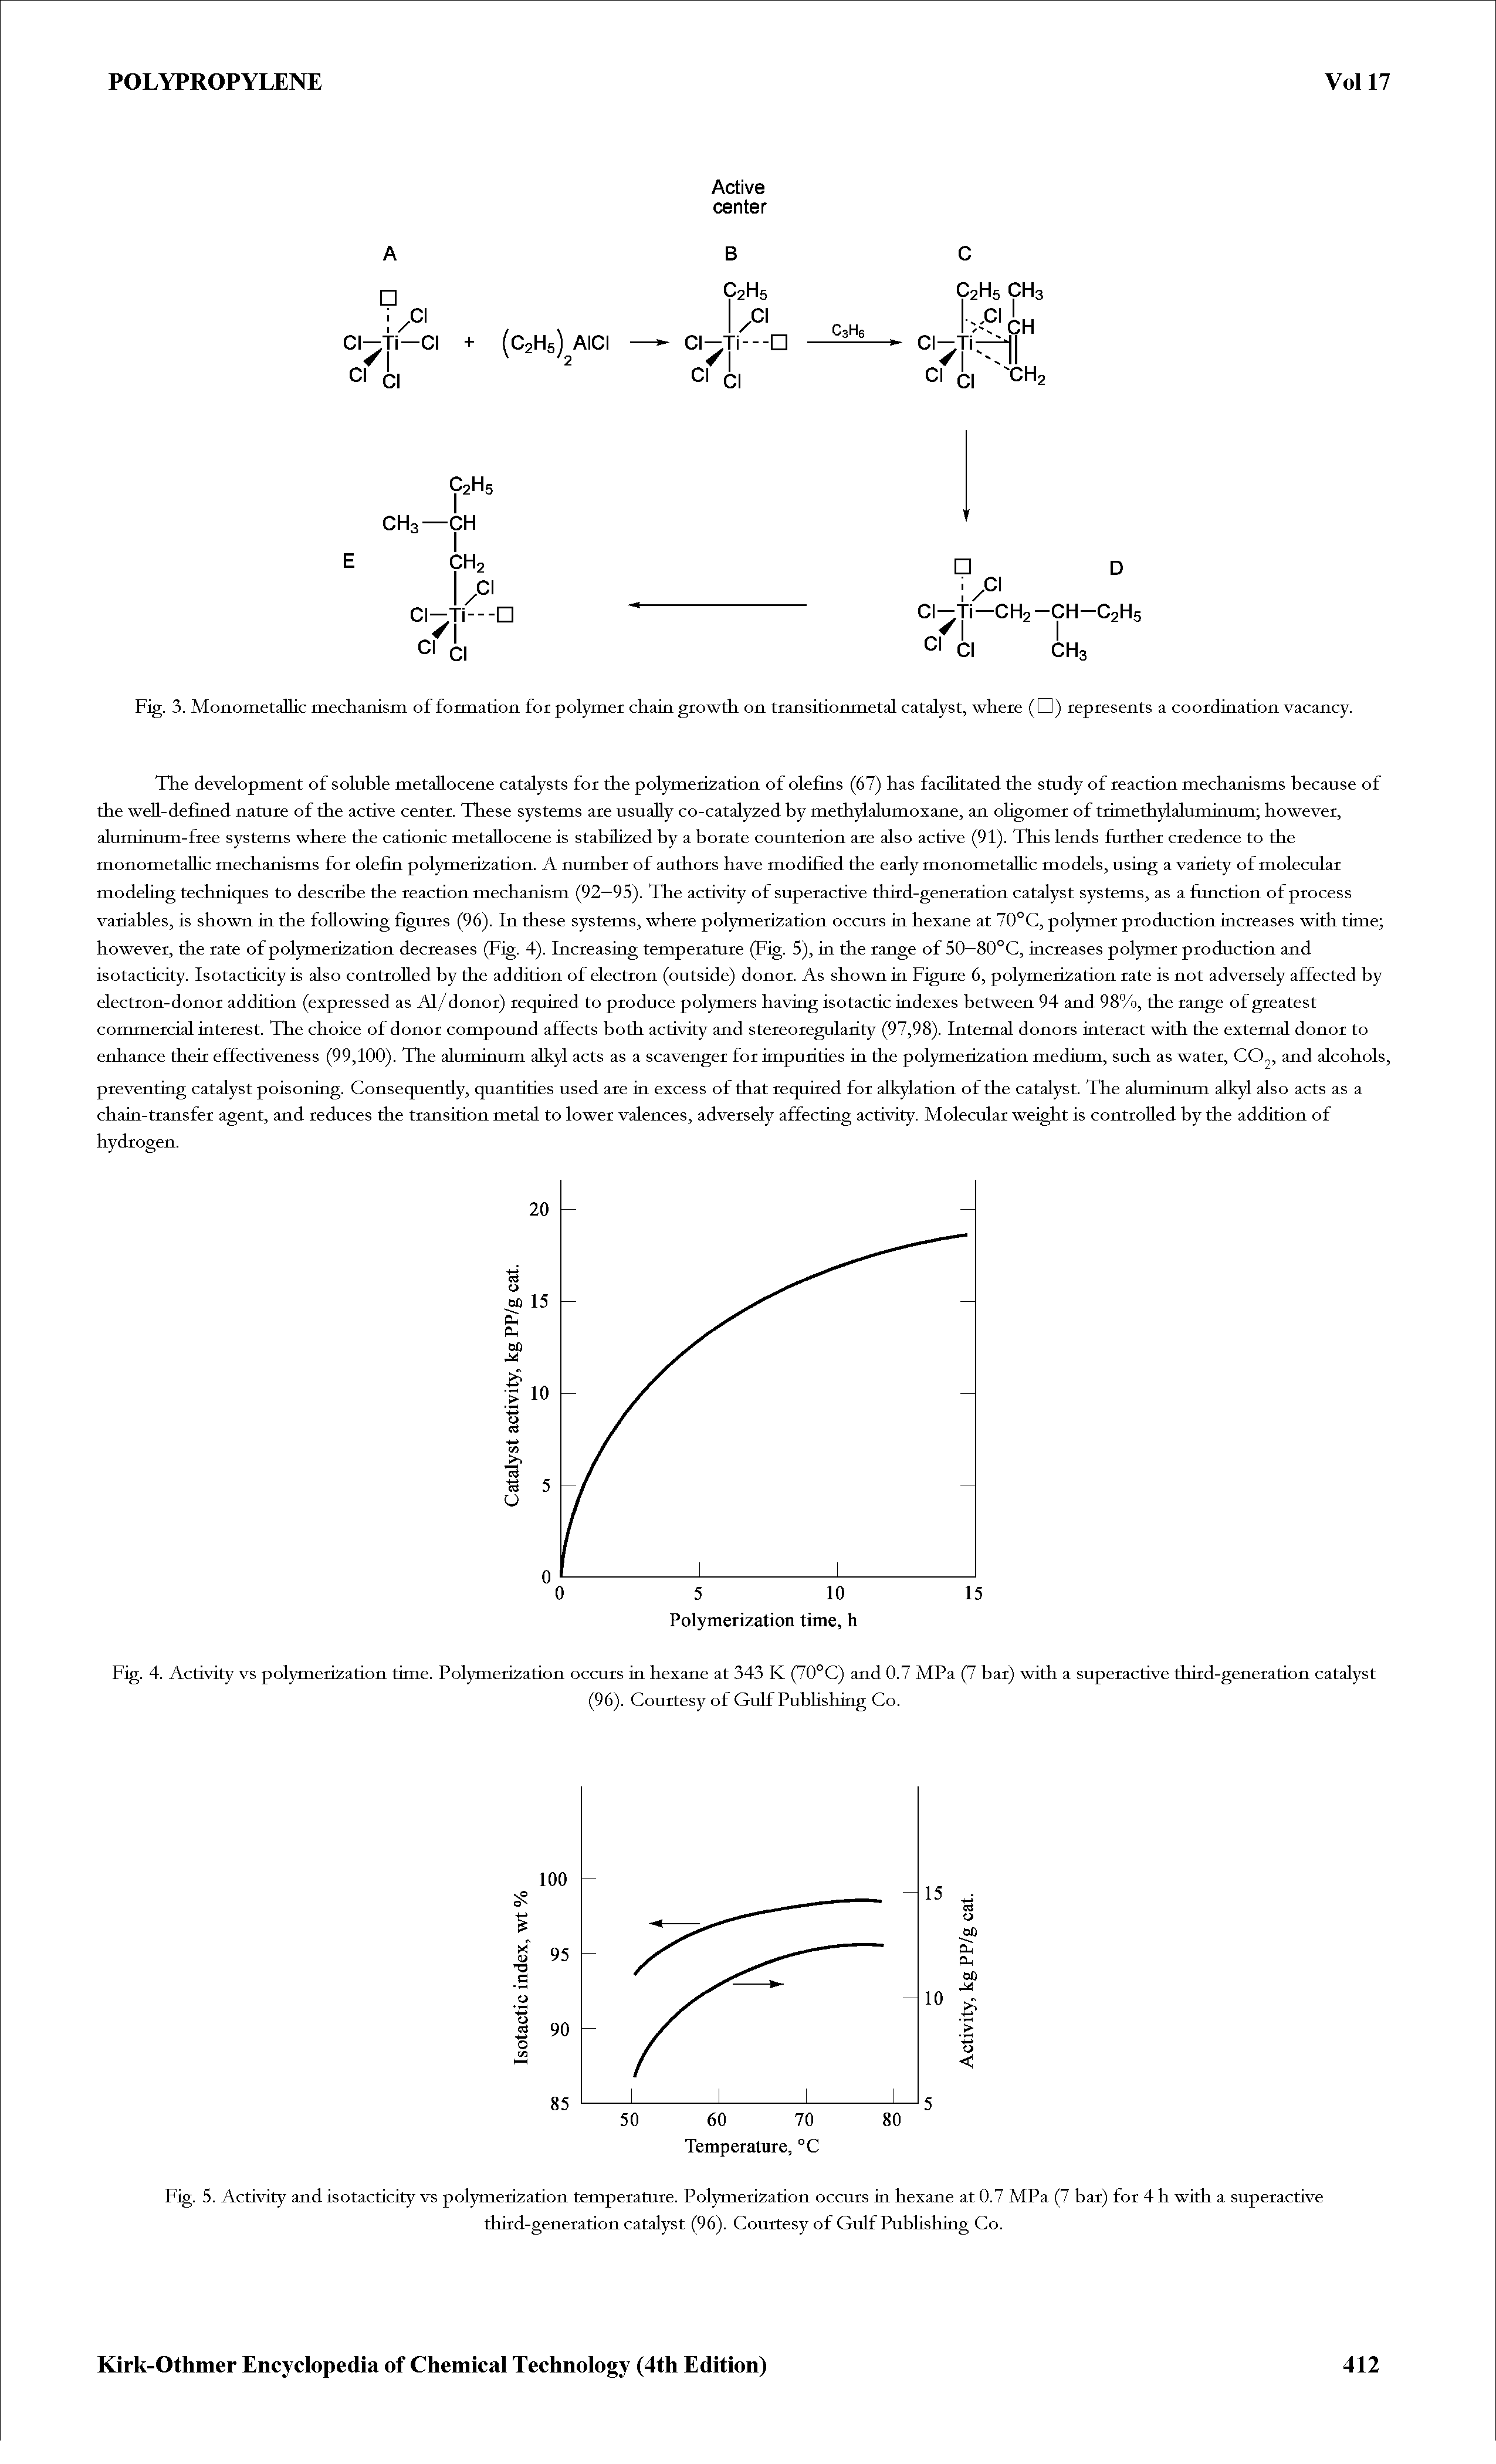 Fig. 5. Activity and isotacticity vs polymerization temperature. Polymerization occurs in hexane at 0.7 MPa (7 bat) for 4 h with a superactive...